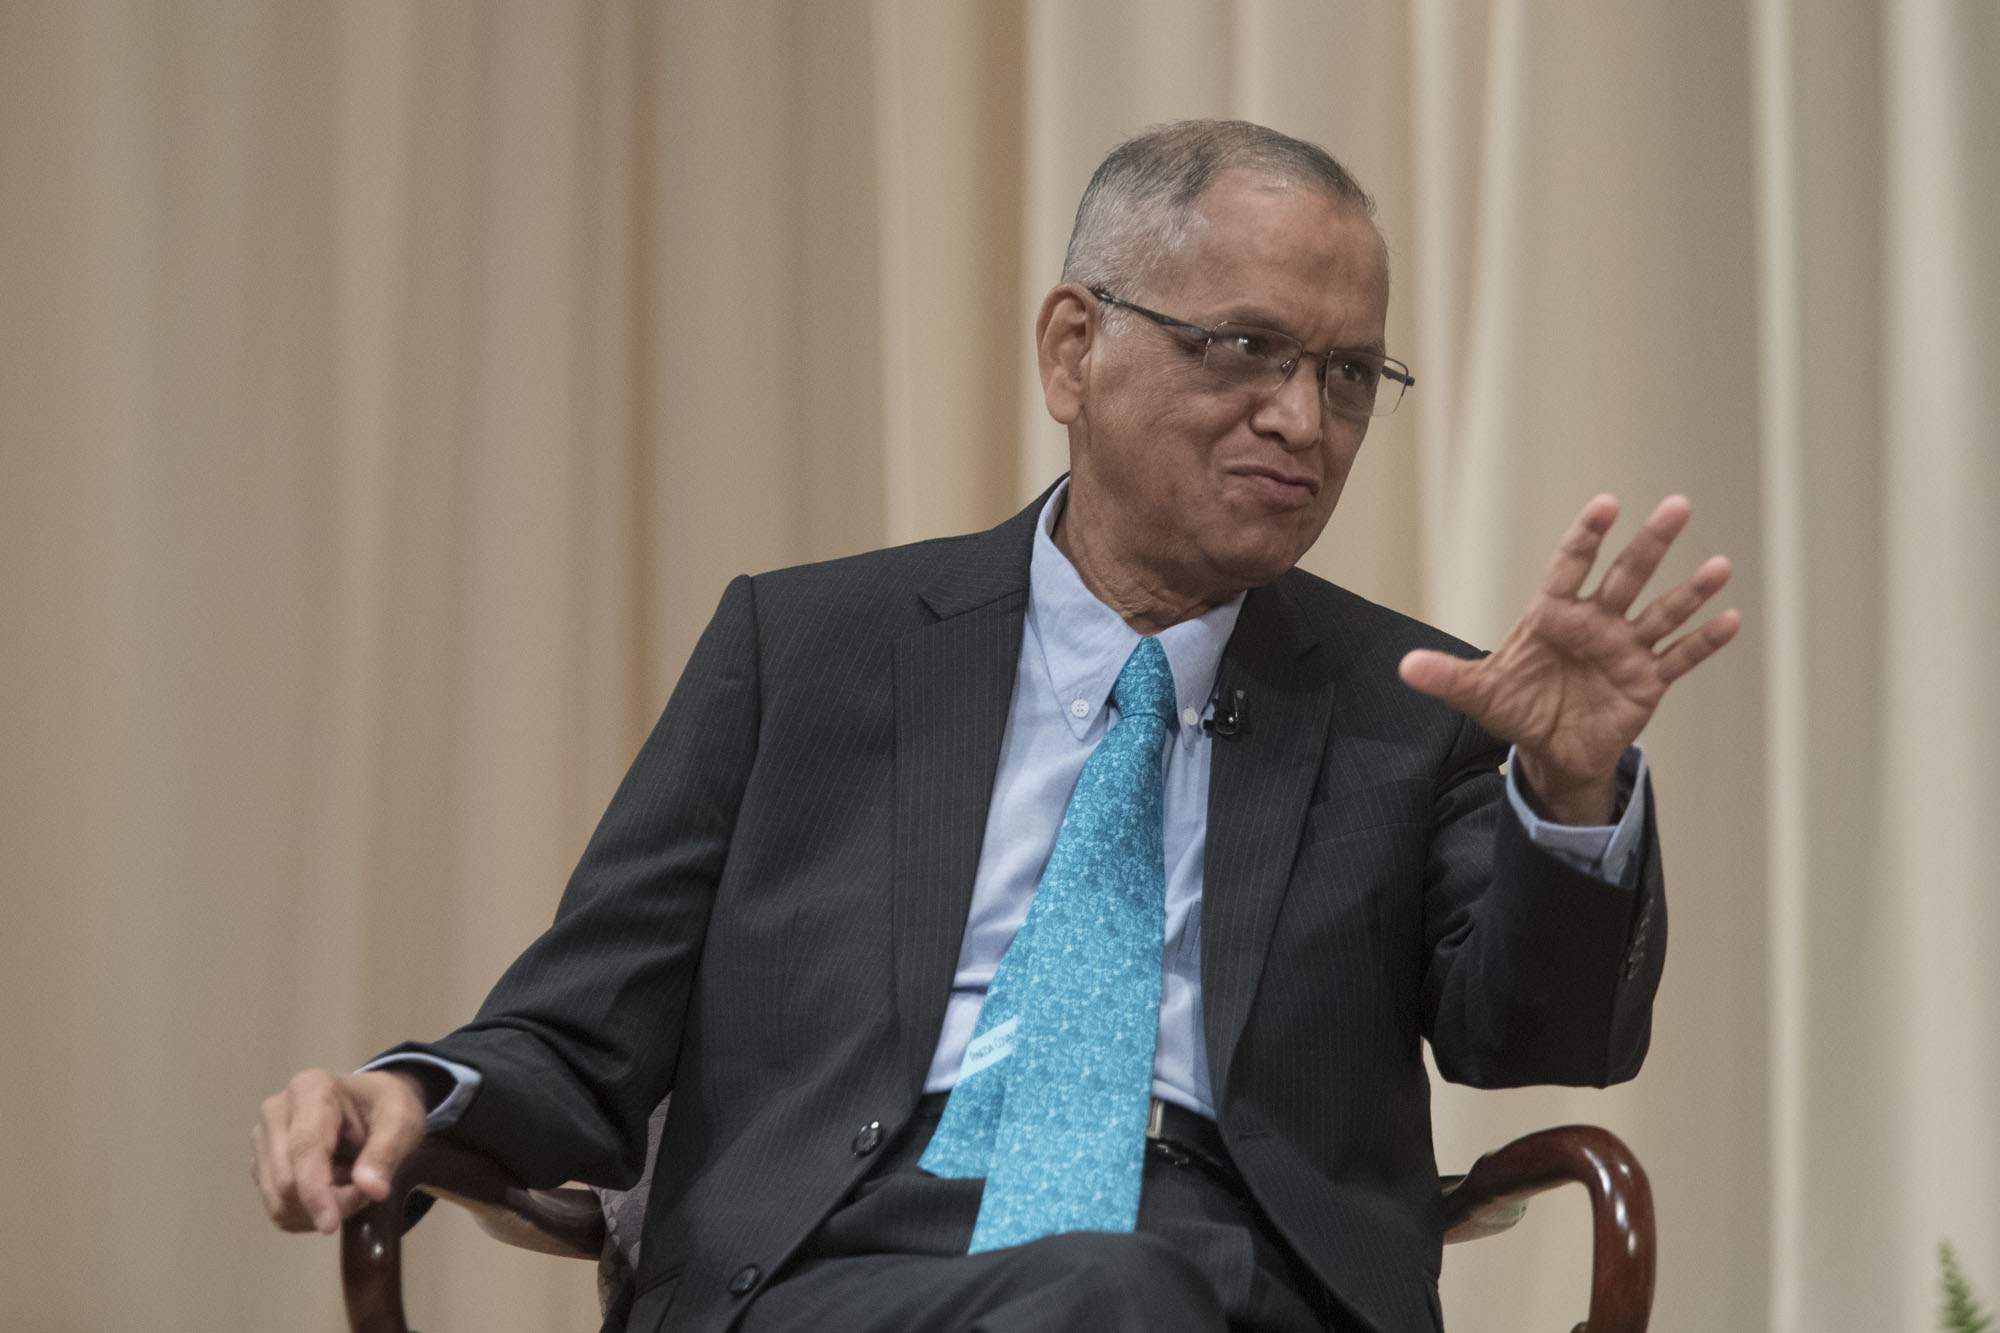 Infosys founder and former CEO and Chairman Narayana Murthy spoke Wednesday at the Darden School of Business. (Photo by Dan Addison, University Communications)